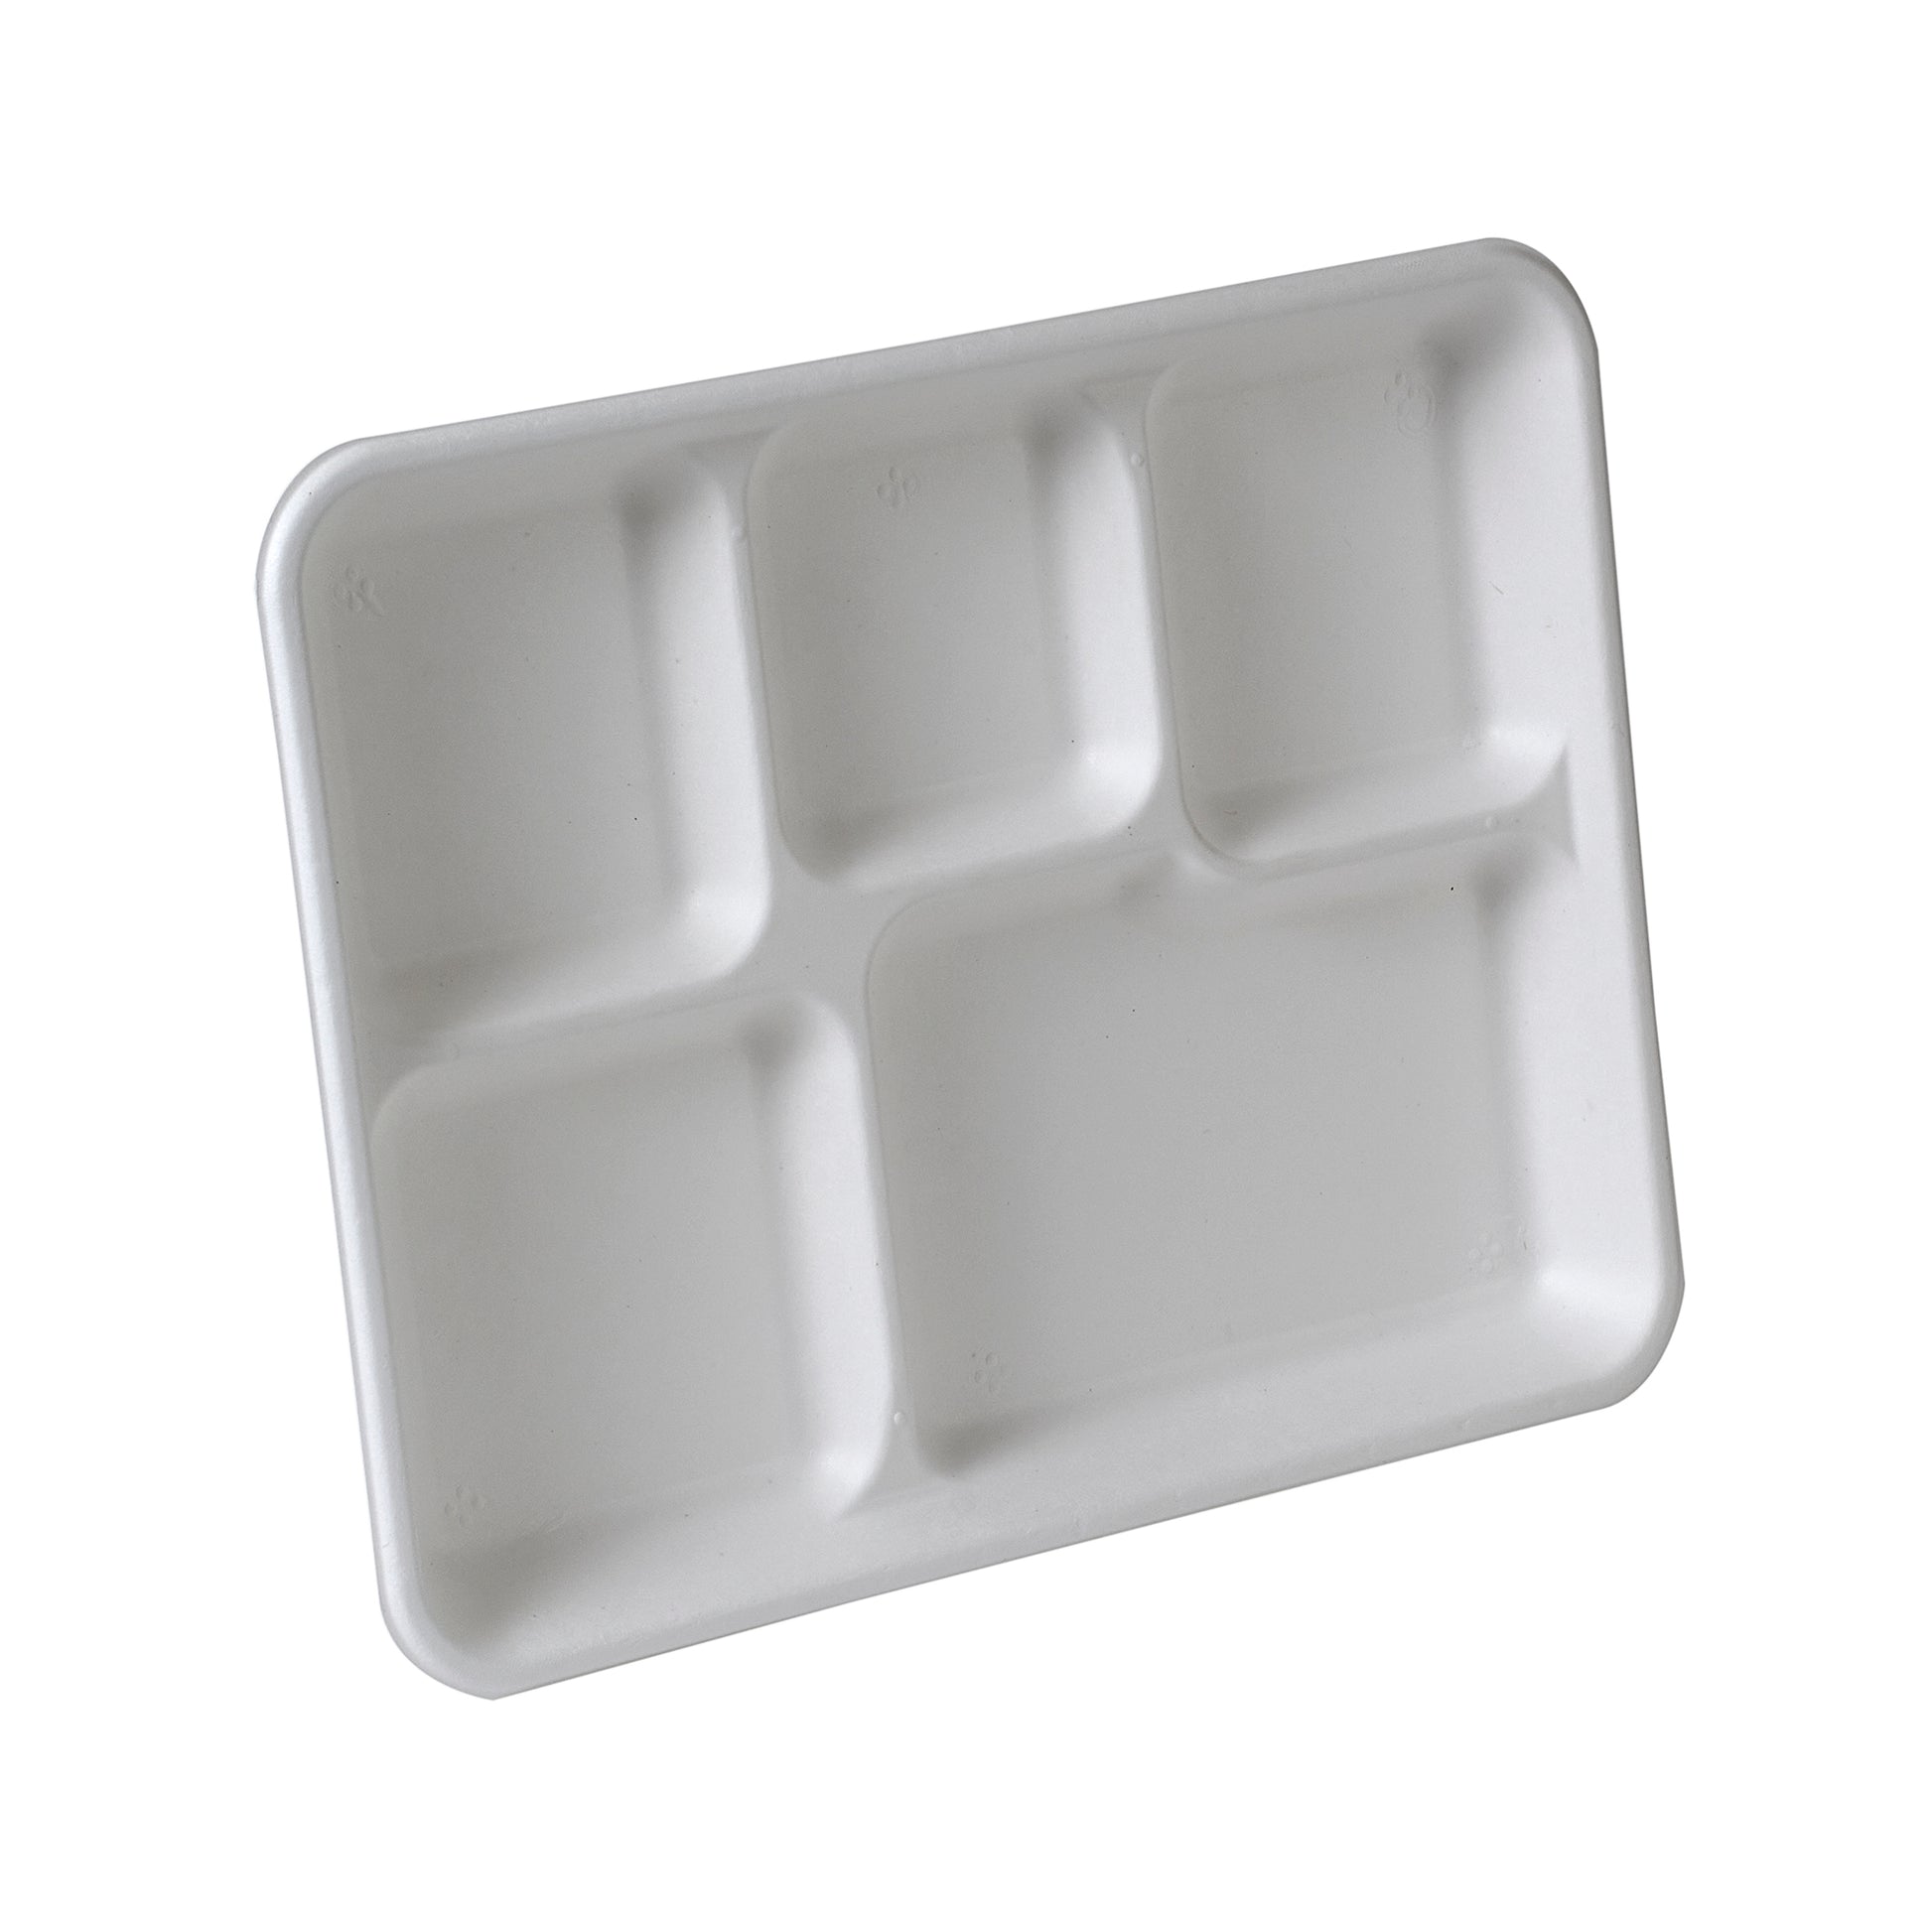 School Lunch Tray 5 Compartment